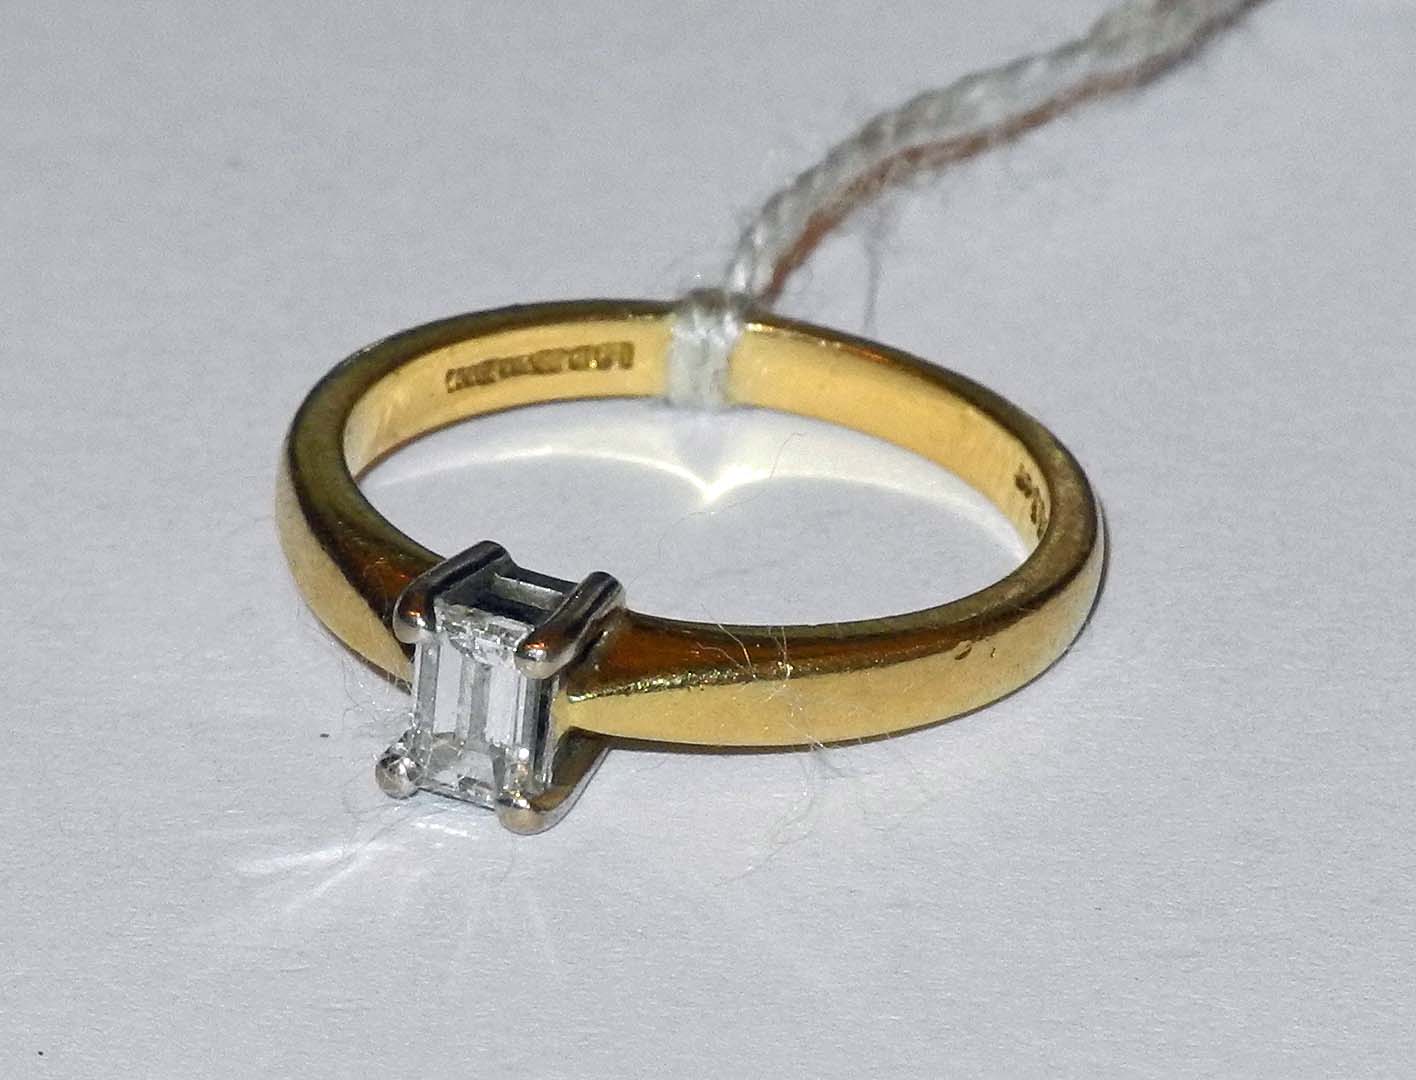 An 18ct yellow gold and diamond solitaire ring, set with a 0.33pt emerald cut stone.